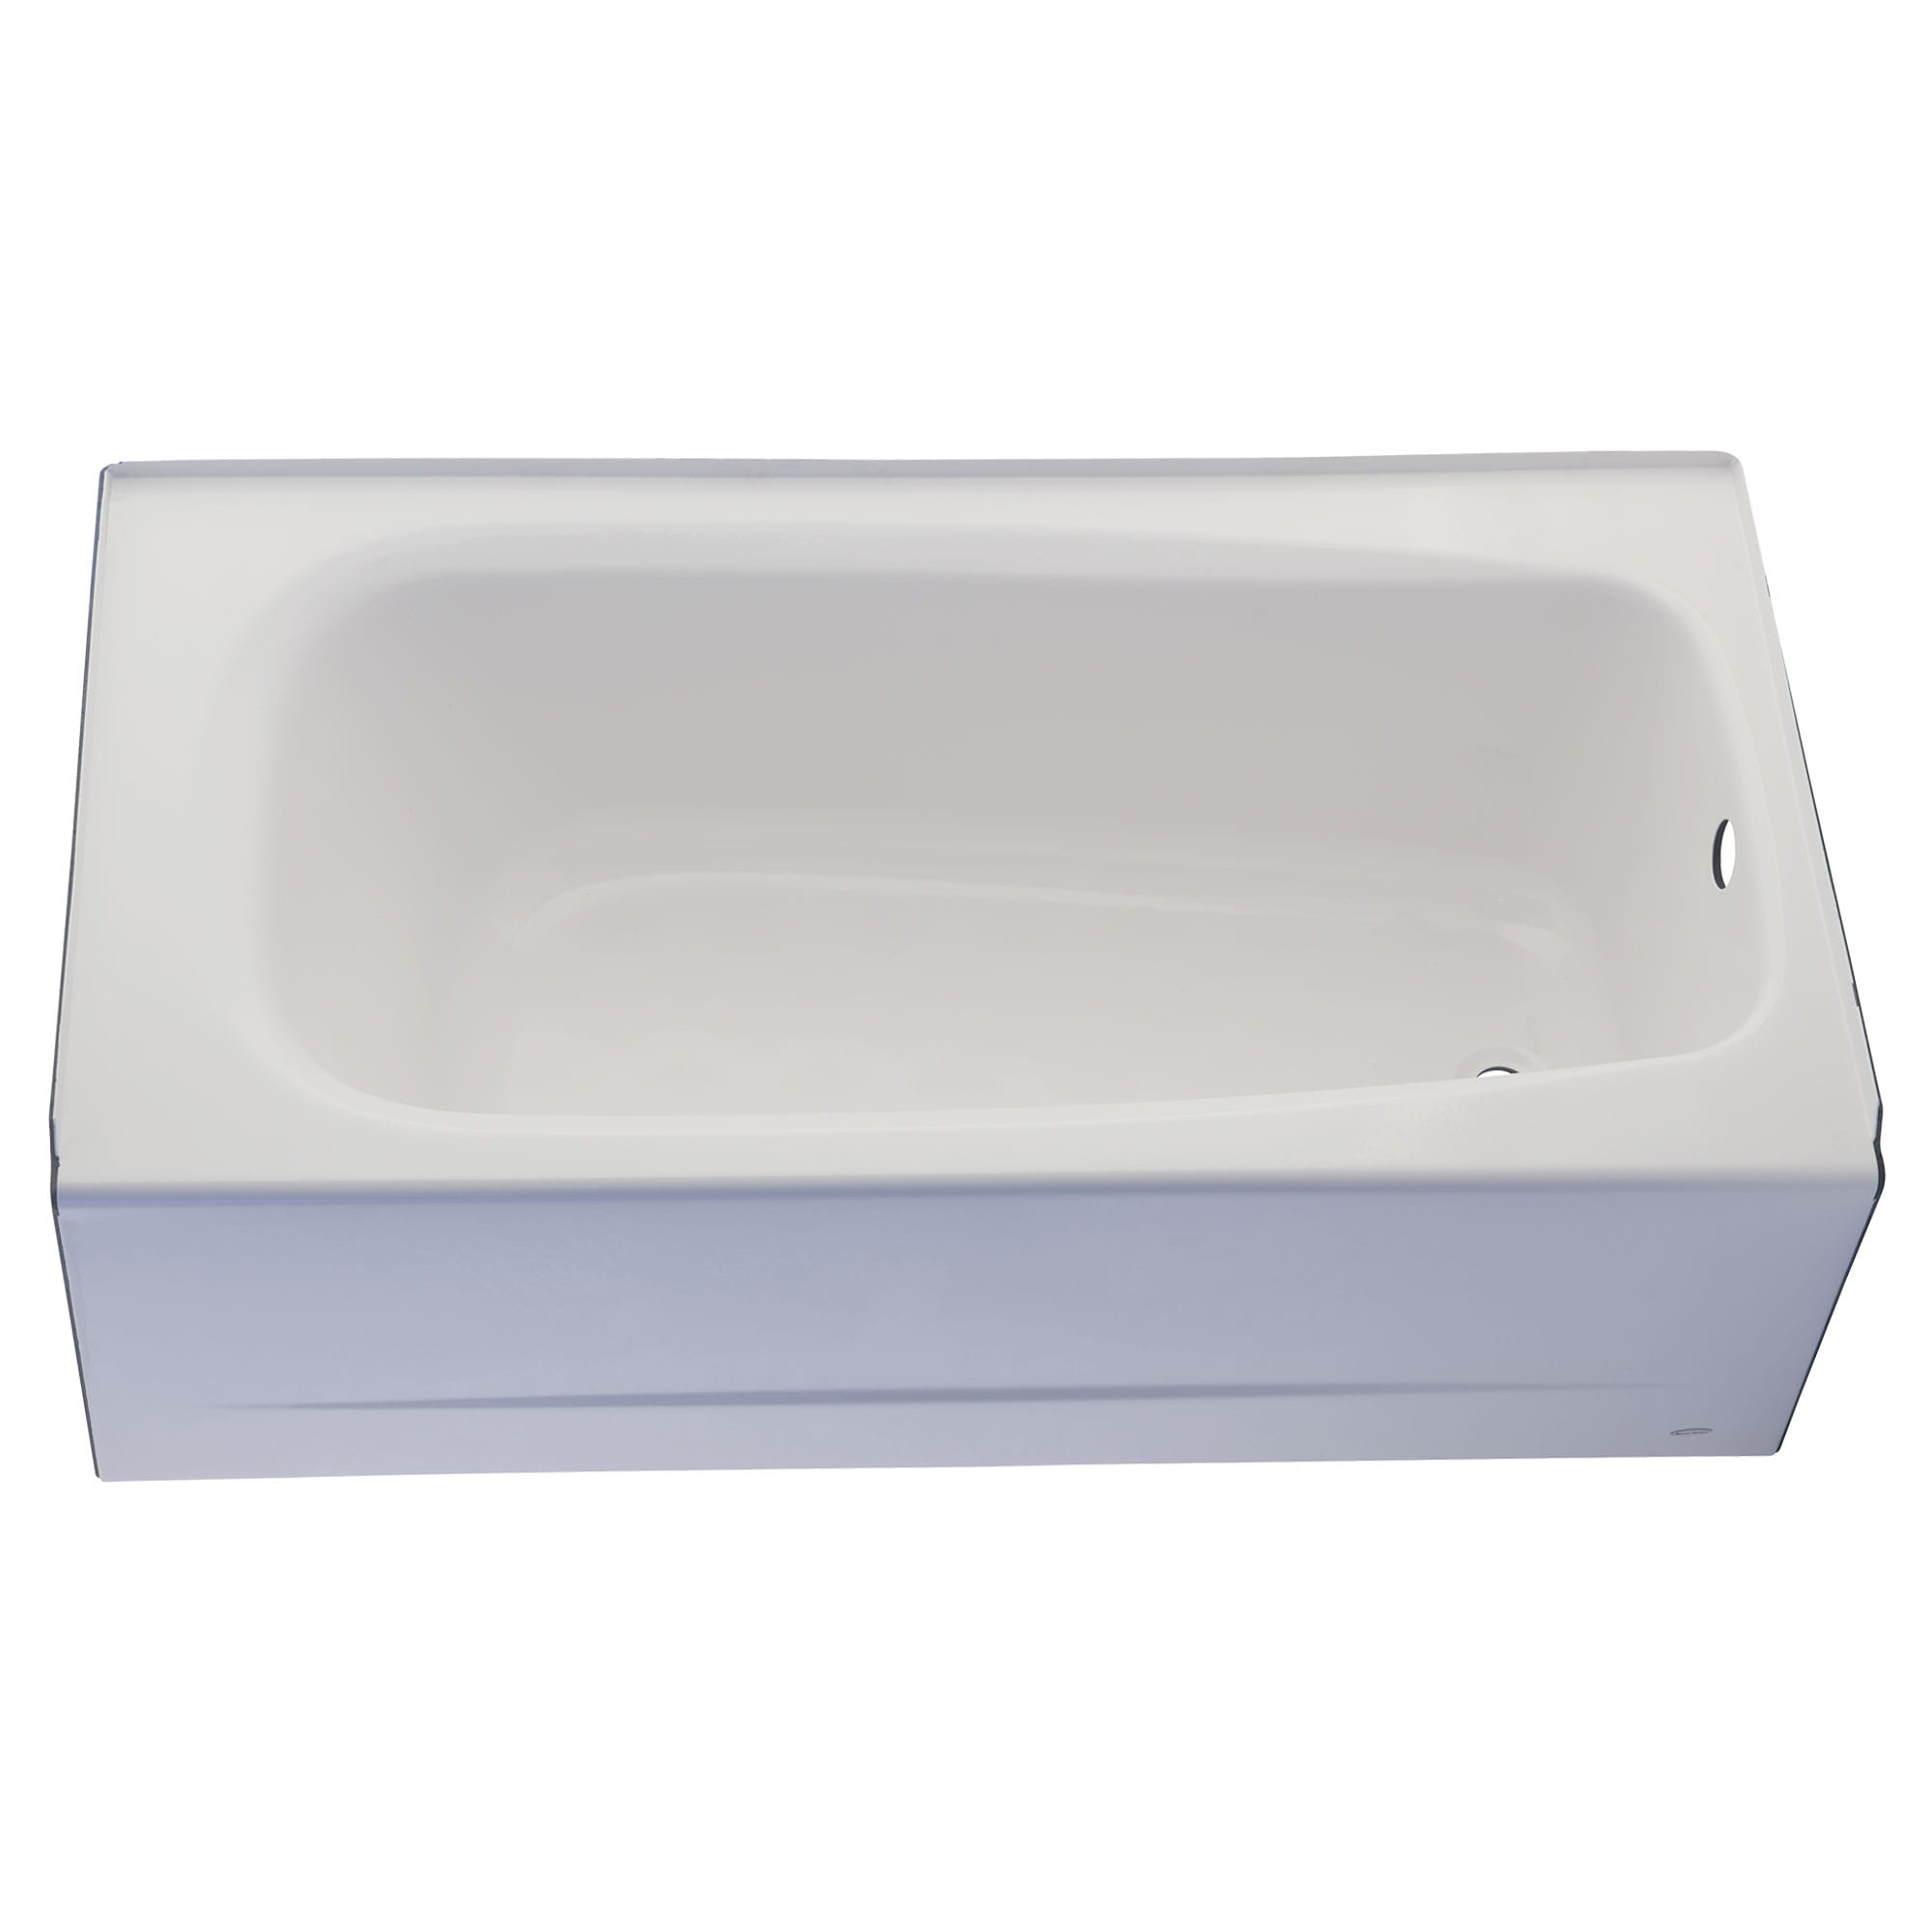 Cambridge Americast 60 x 32 Inch Integral Apron Bathtub With Right Hand Outlet WHITE